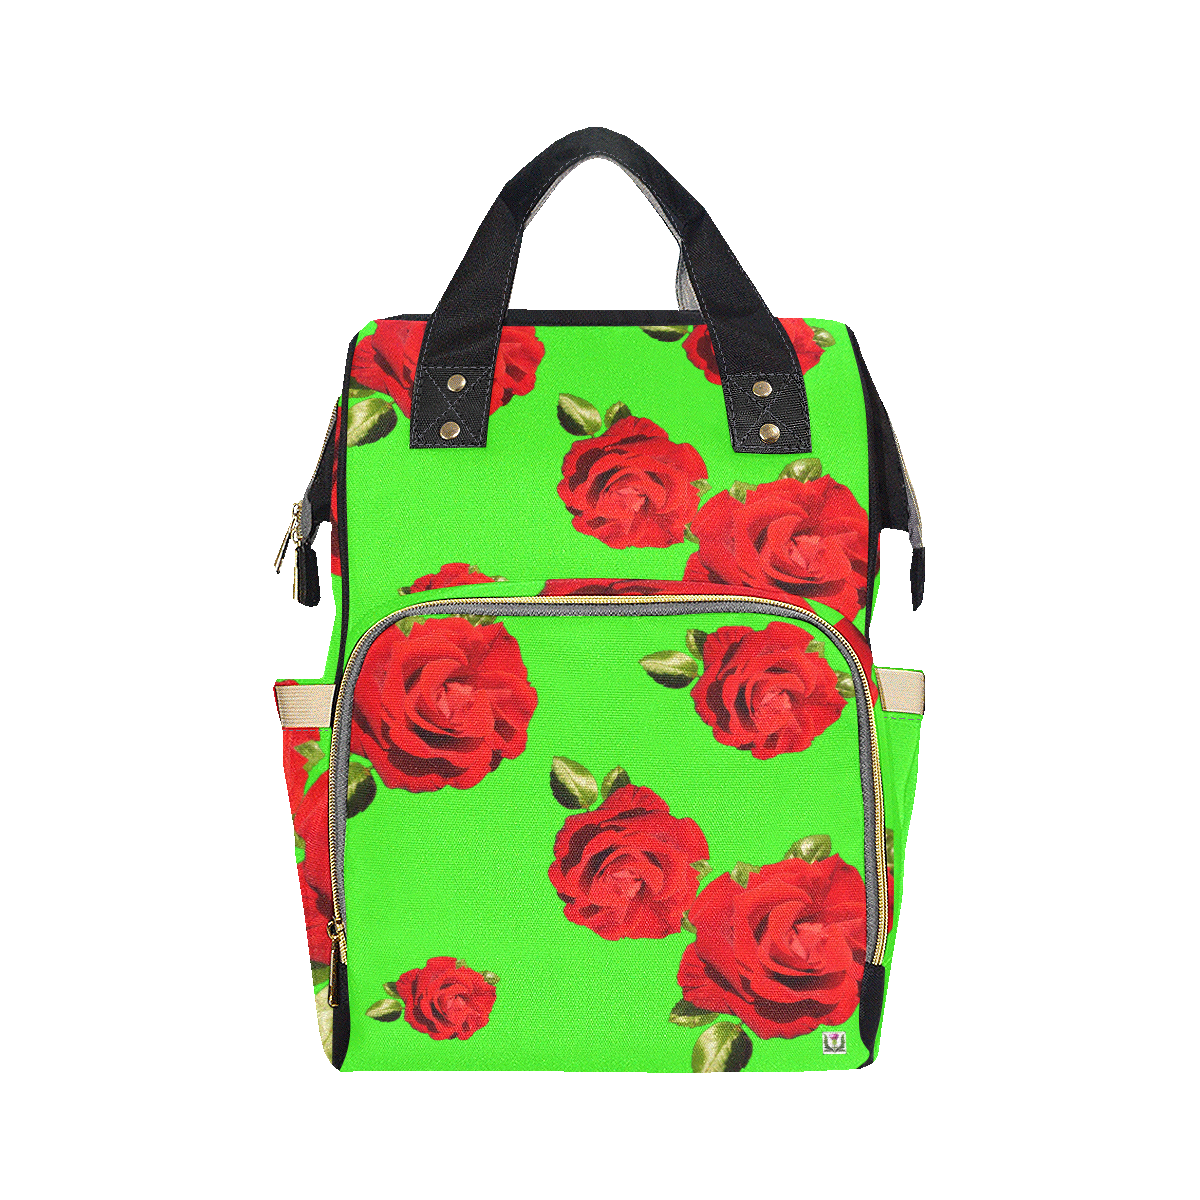 Fairlings Delight's Floral Luxury Collection- Red Rose Multi-Function Diaper Backpack 53086c18 Multi-Function Diaper Backpack/Diaper Bag (Model 1688)